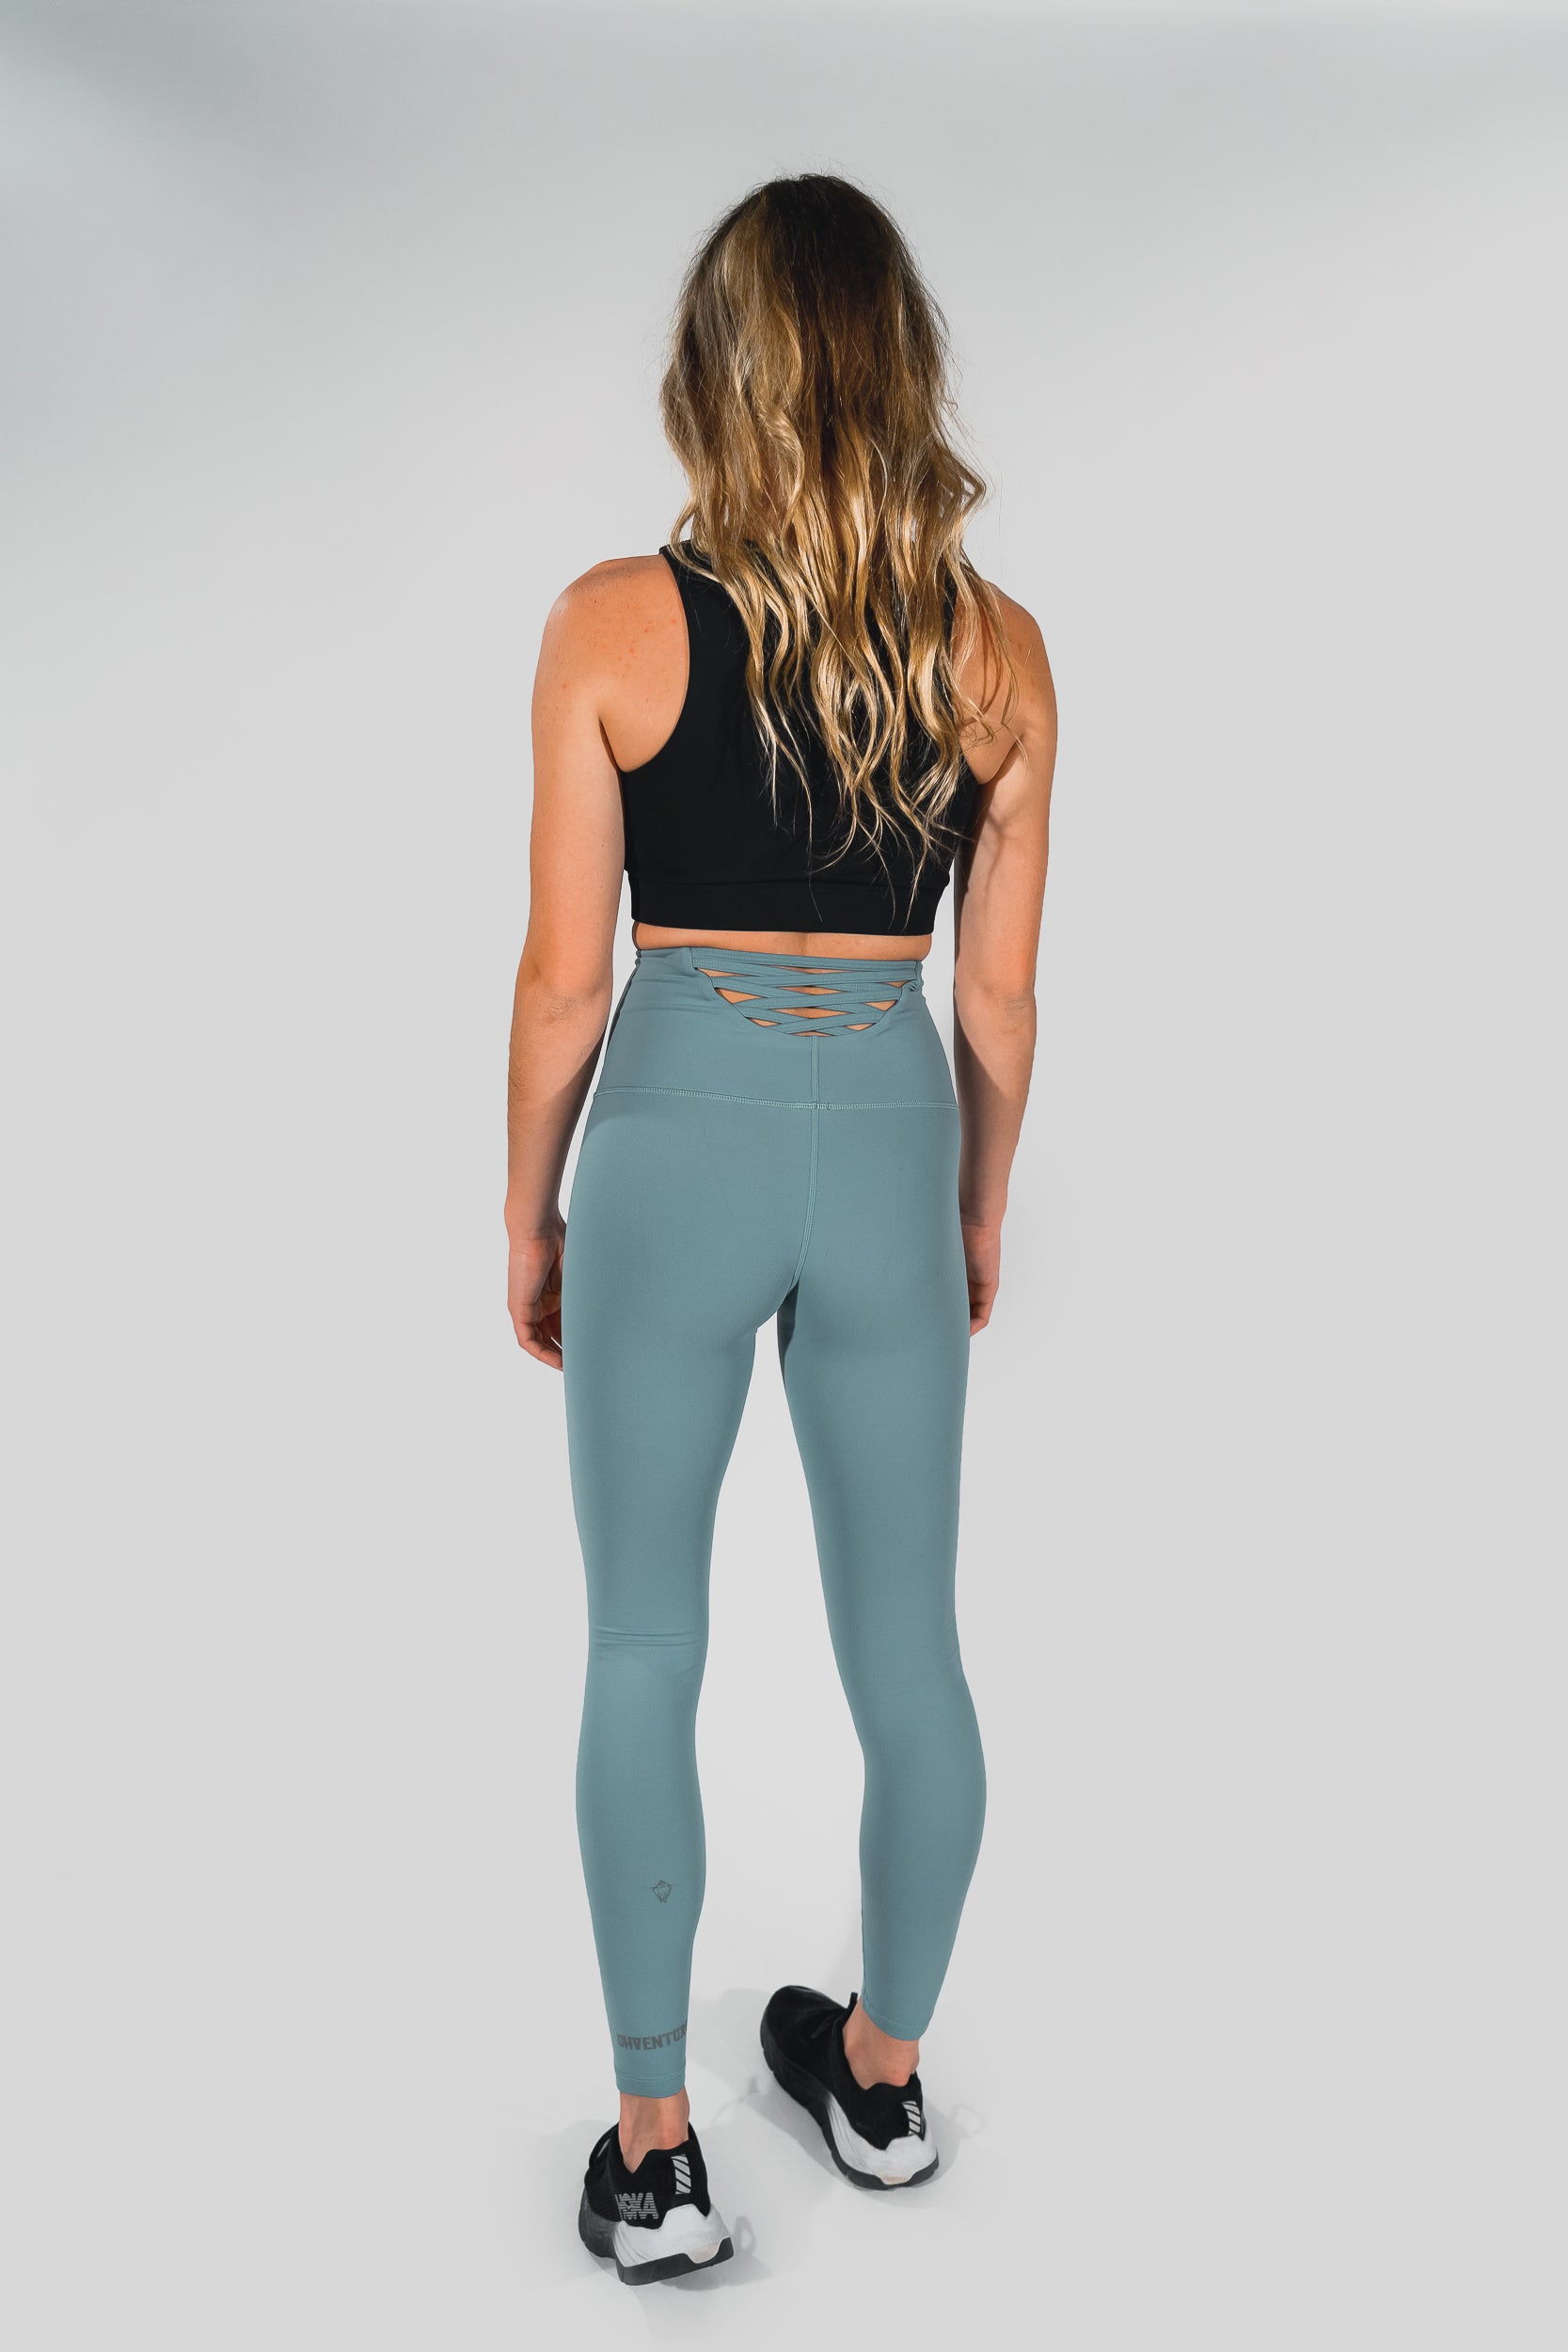 Teal Seamless Workout Outfit, Activewear Outfits